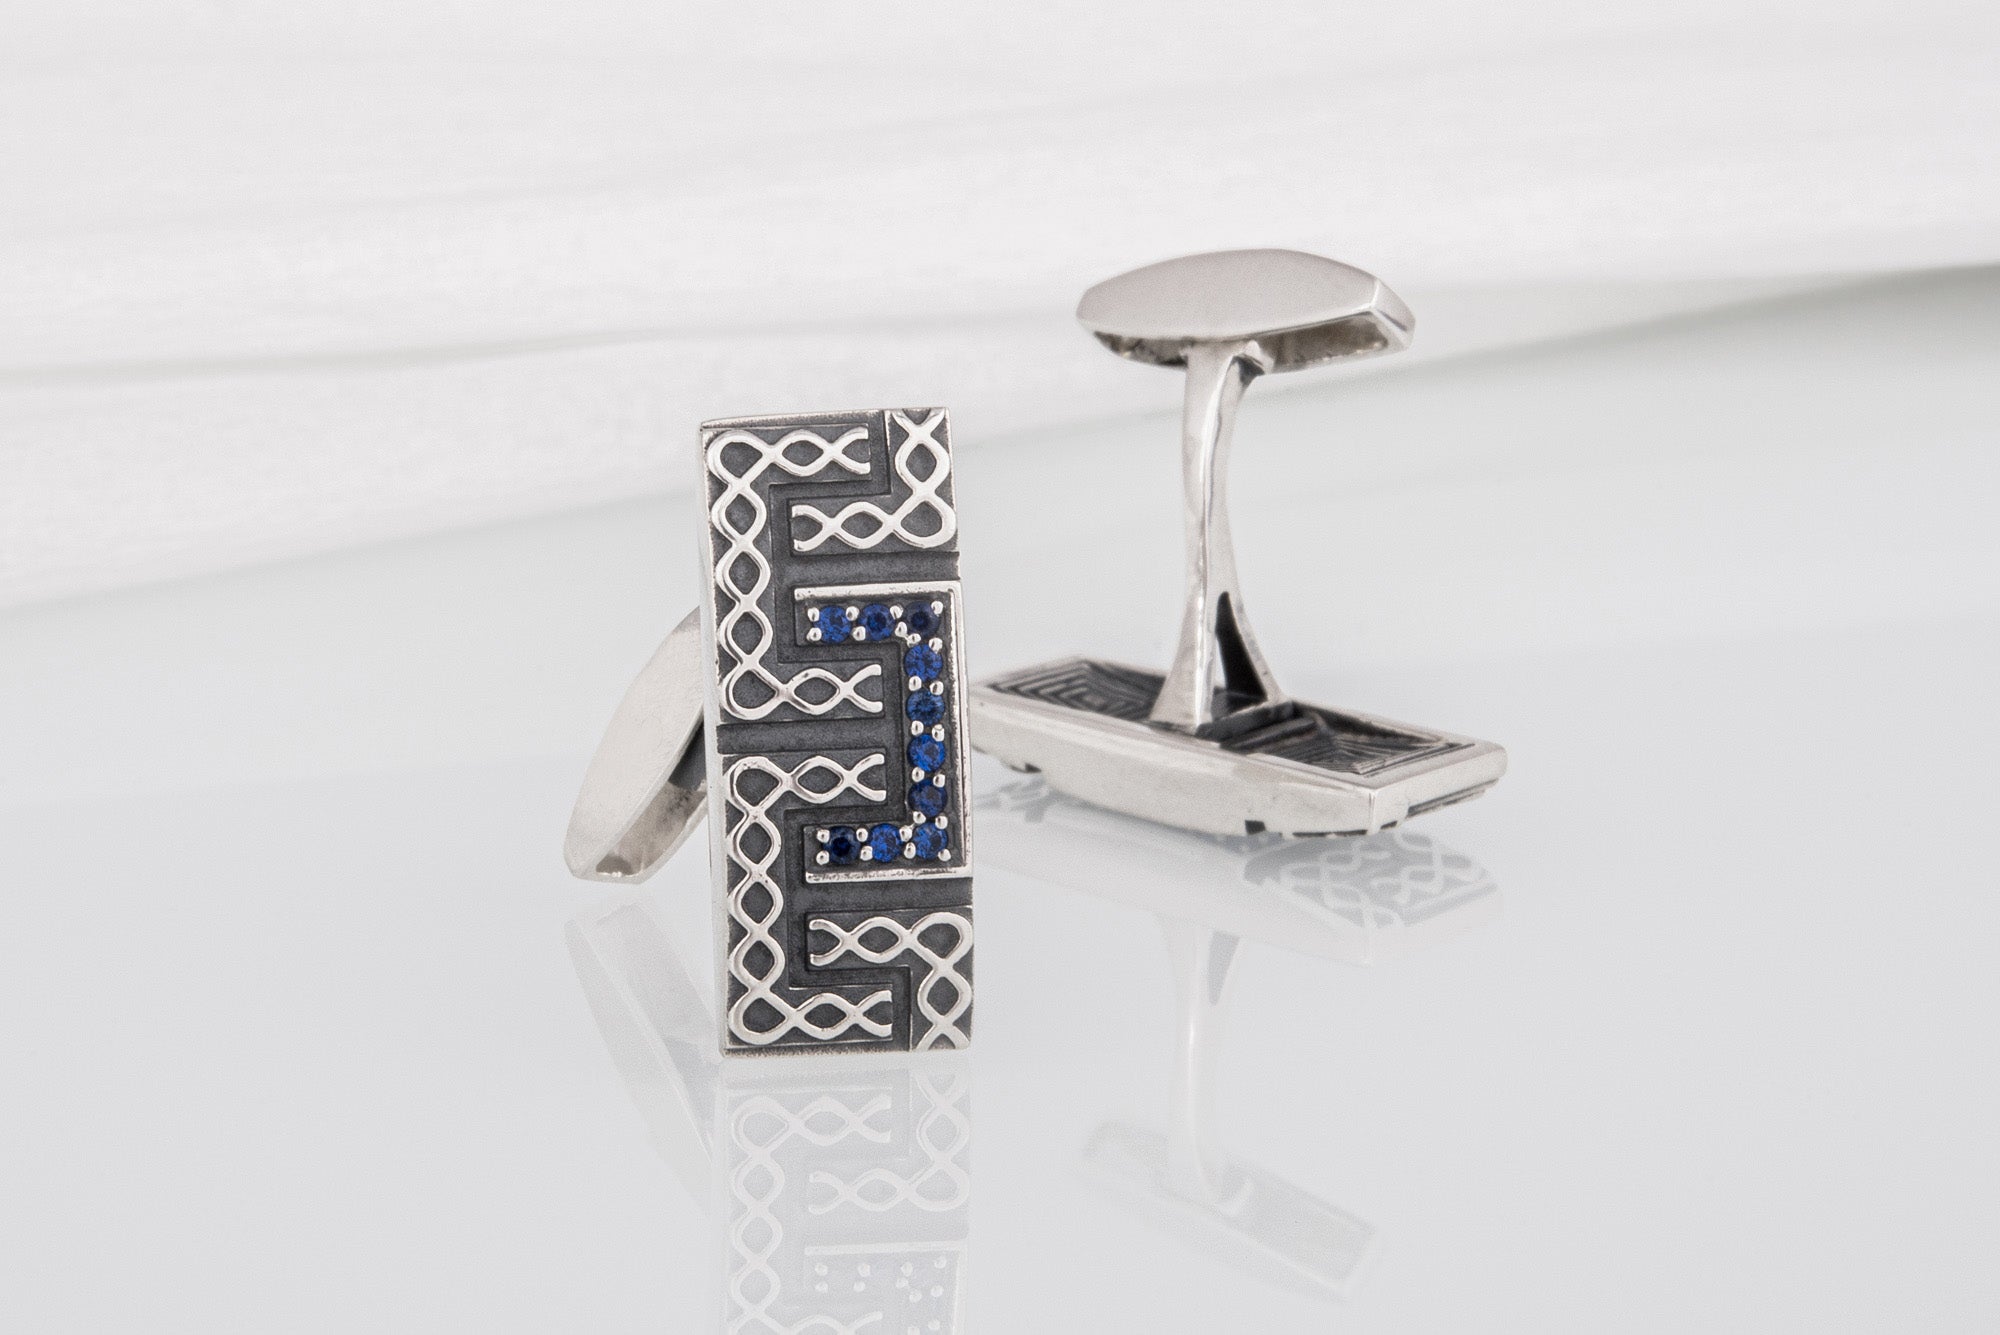 925 silver Cufflinks with gems made in fashion style, unique handcrafted jewelry